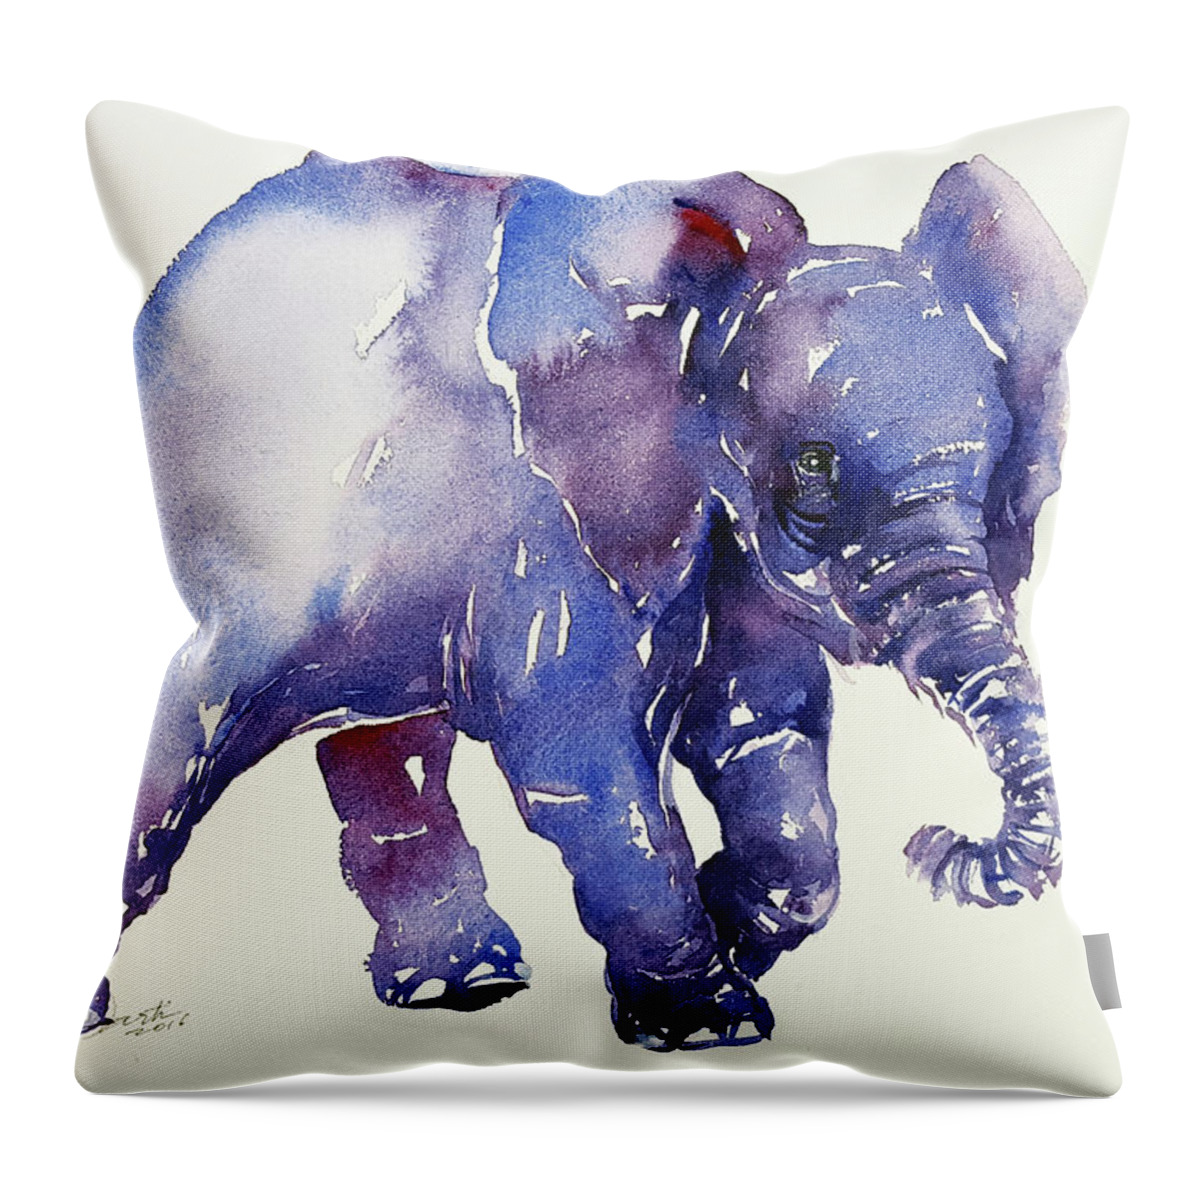 Elephant Throw Pillow featuring the painting Inky Blue Elephant by Arti Chauhan